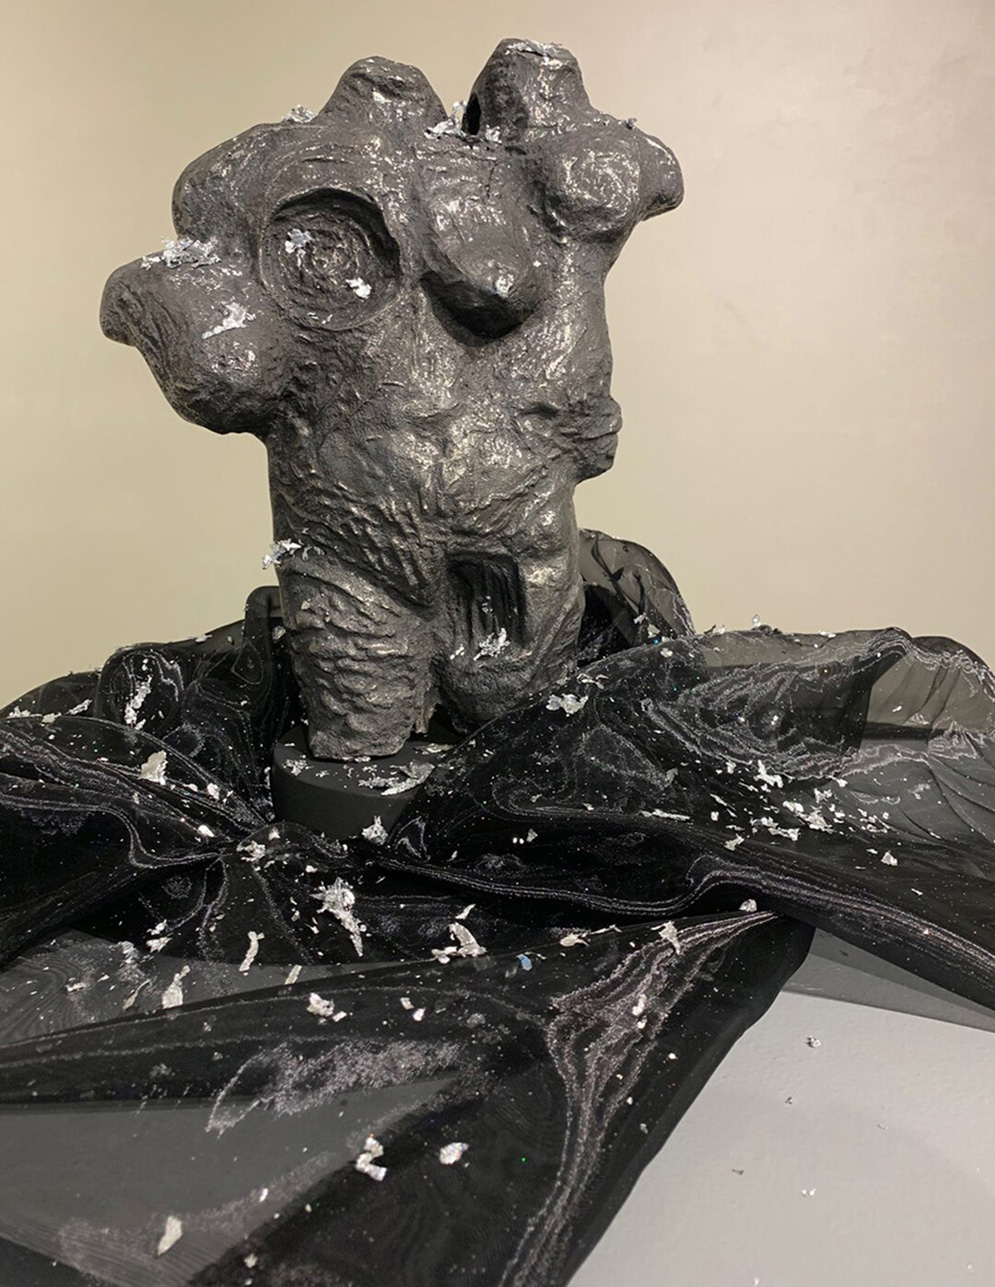 A gray and shiny sculpture stands on top of a black sheer material with silver glitter flakes. The body is morphed to have extra shoulders coming off of the side, and is missing breast tissue in one are and has it added to another portion of the body. There is a gap in the groin area to signify the lack of sex characteristics in that area. There are ridges on the body to signify stretch marks and morphing. The background behind the iron sculpture is a white wall. 